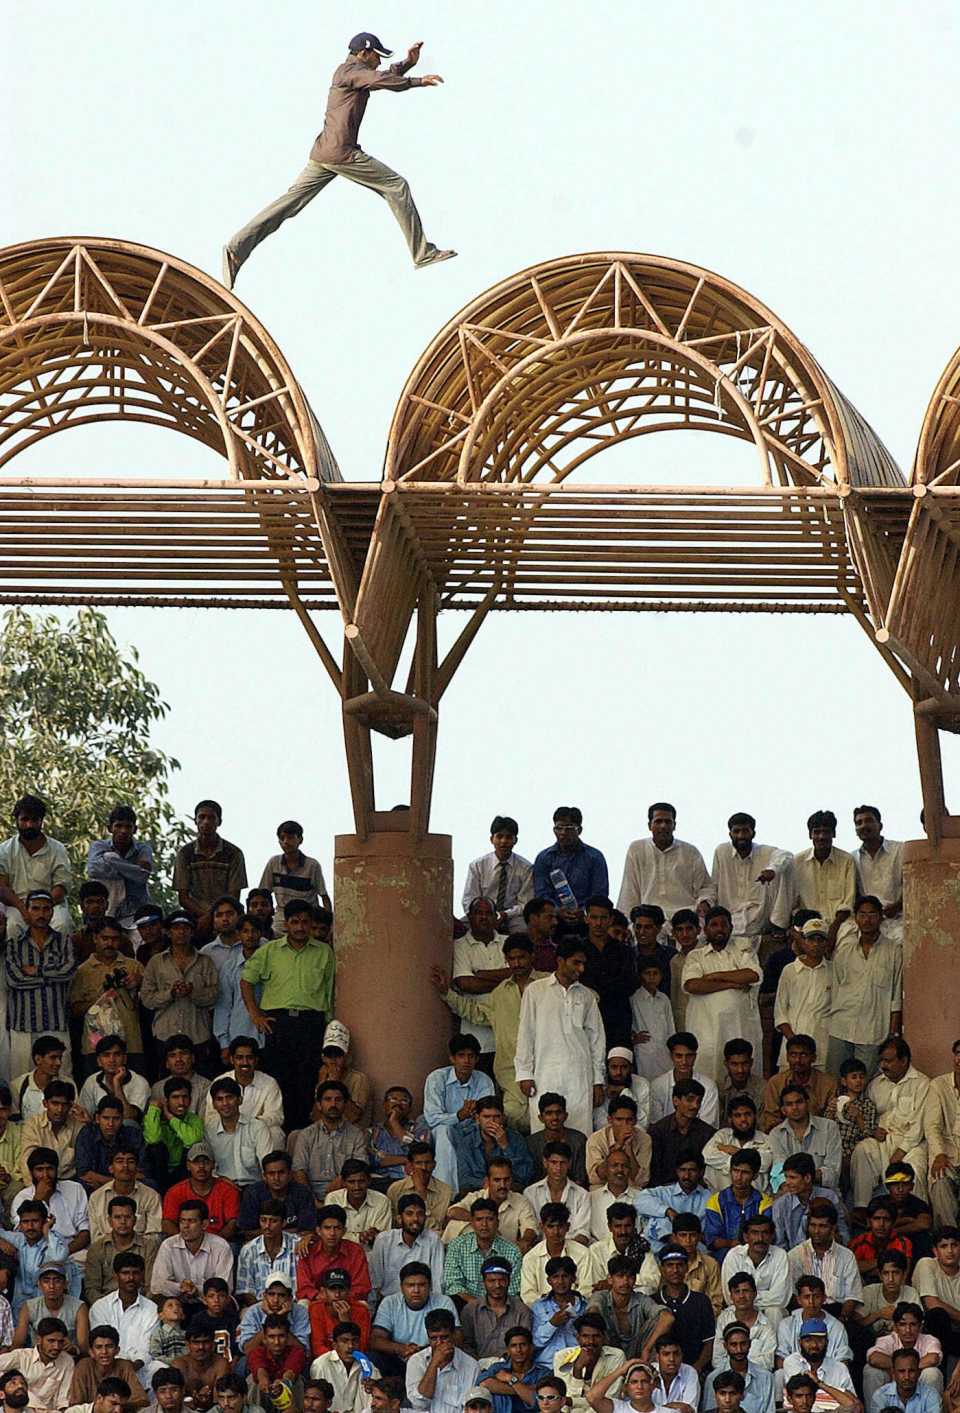 A cricket fan jumps on the roof of a shade